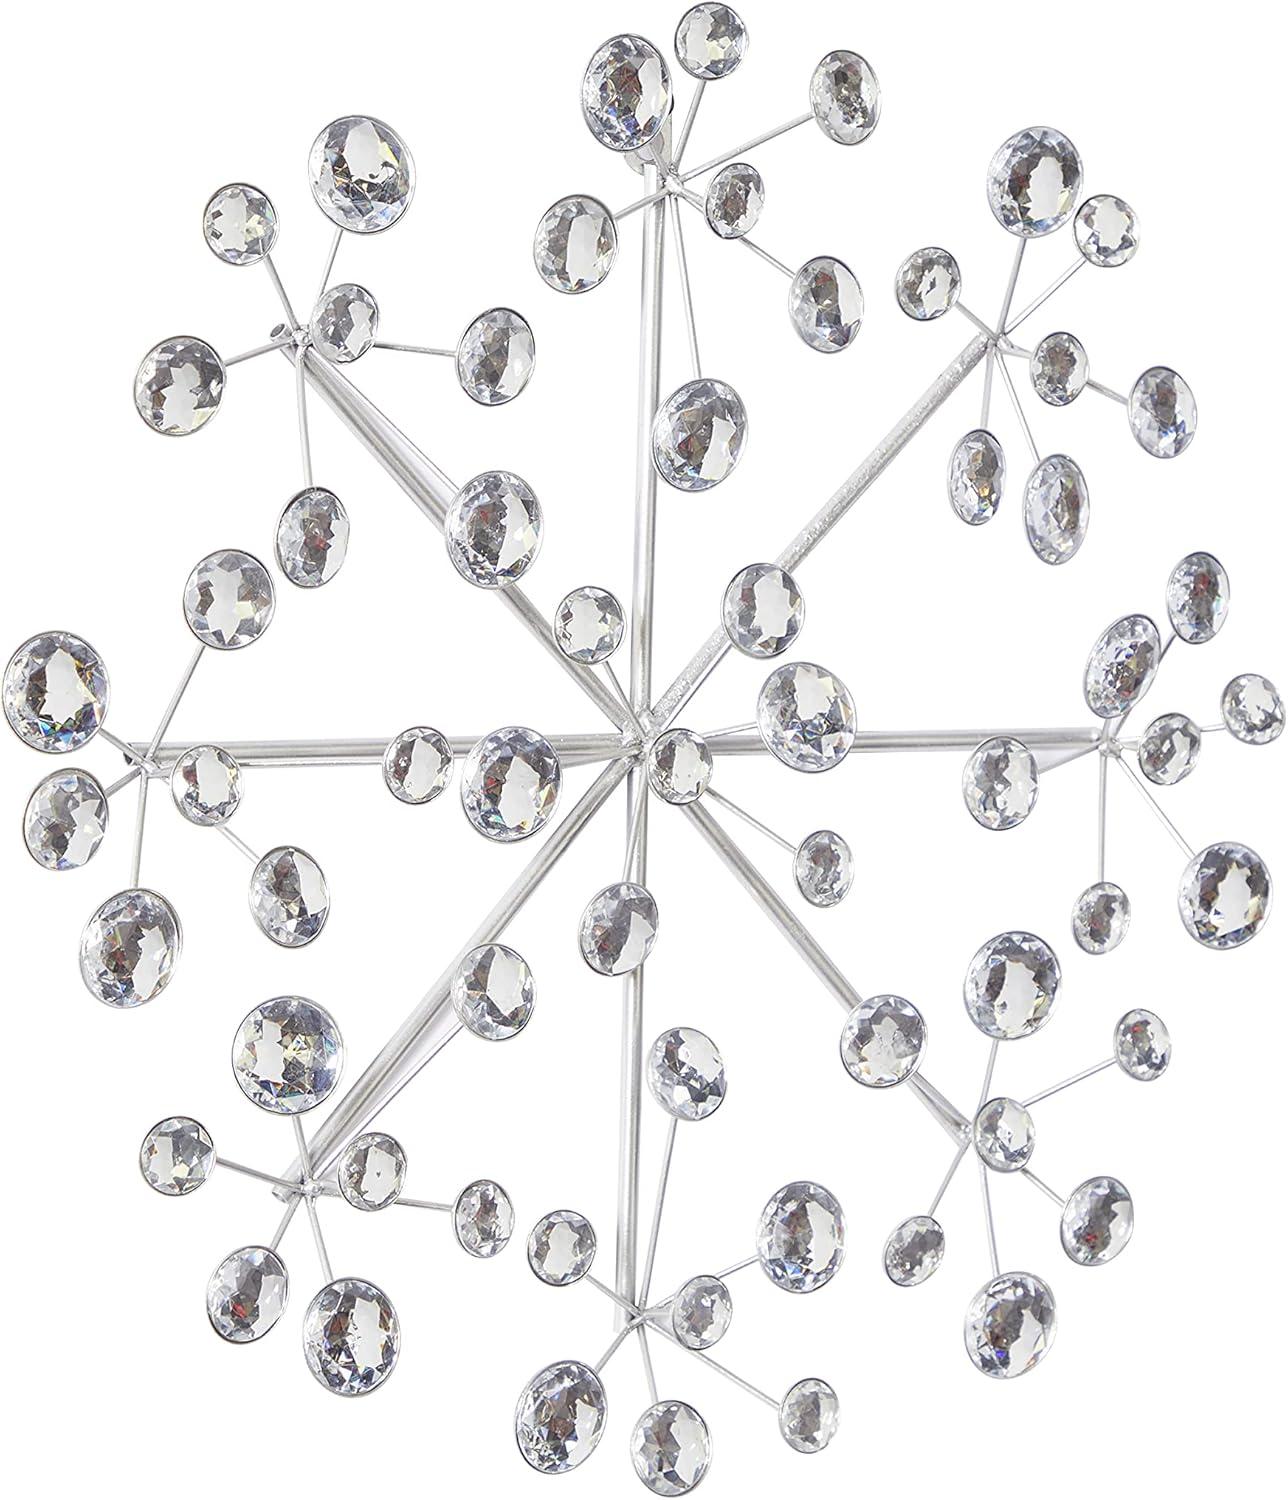 Glamorous Silver Snowflake 16" Metal Wall Sculpture with Acrylic Beads